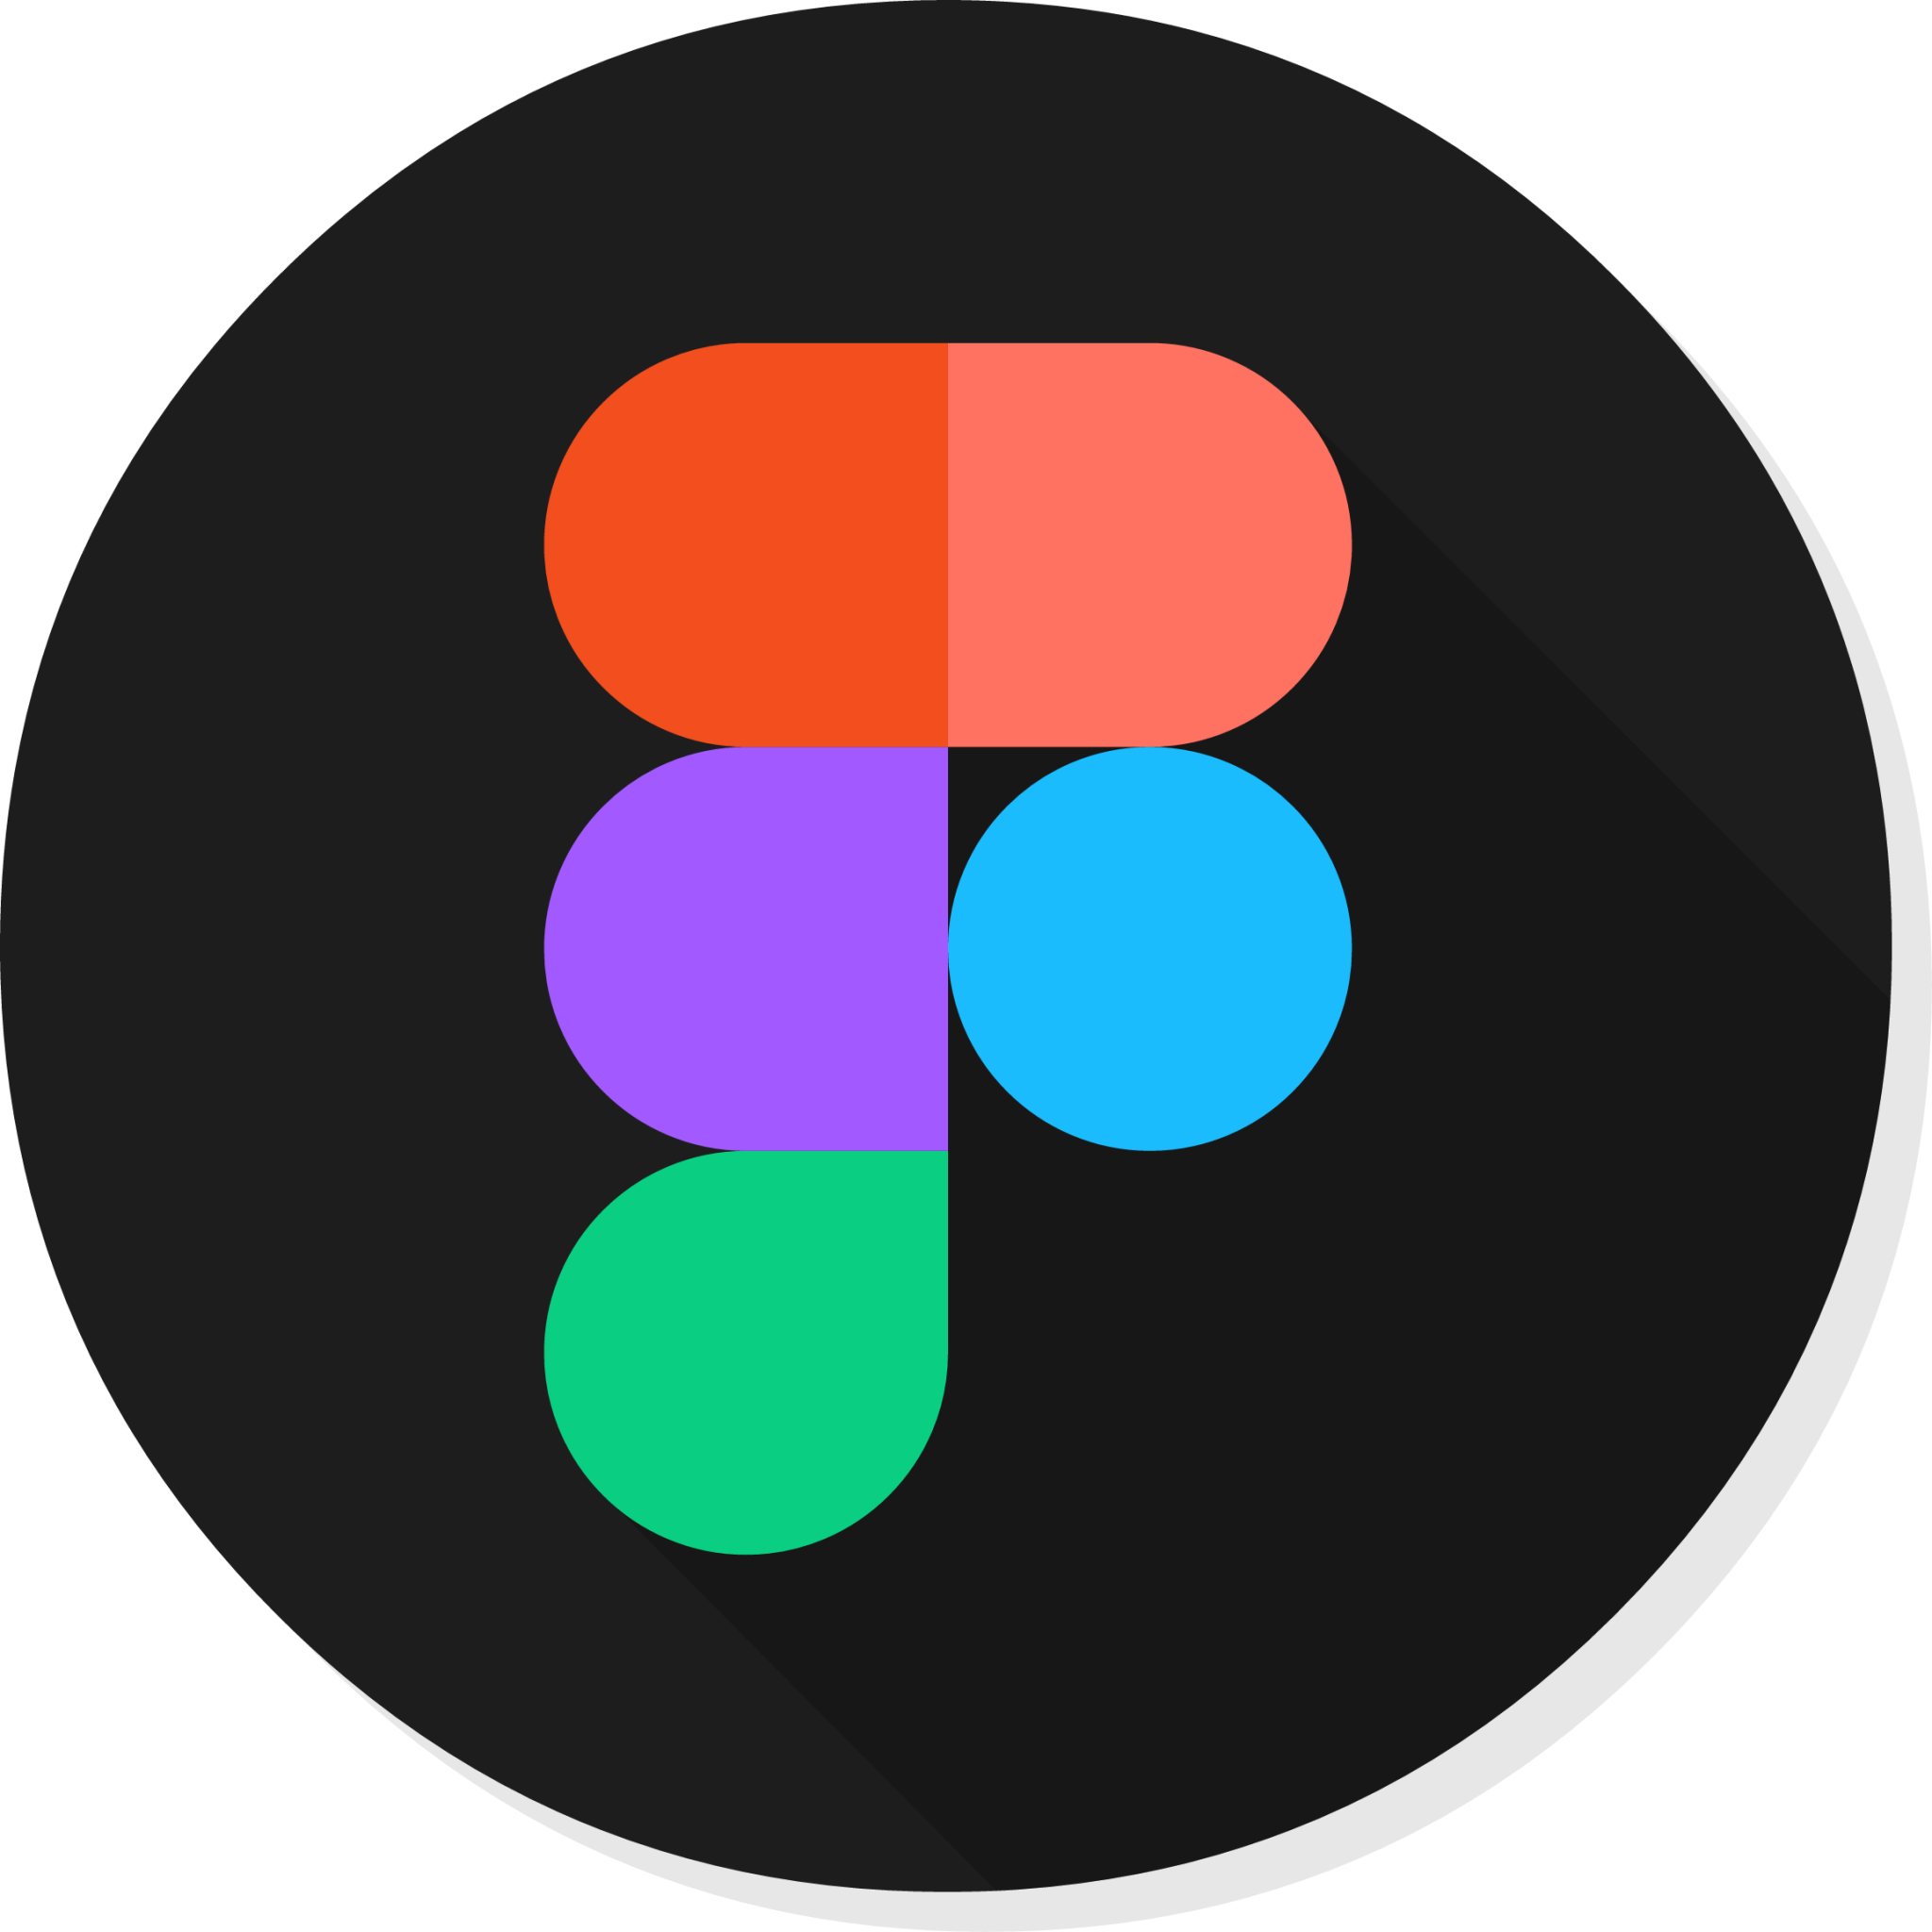 apps-figma-icon-2048x2048-ctjj5ab7.png